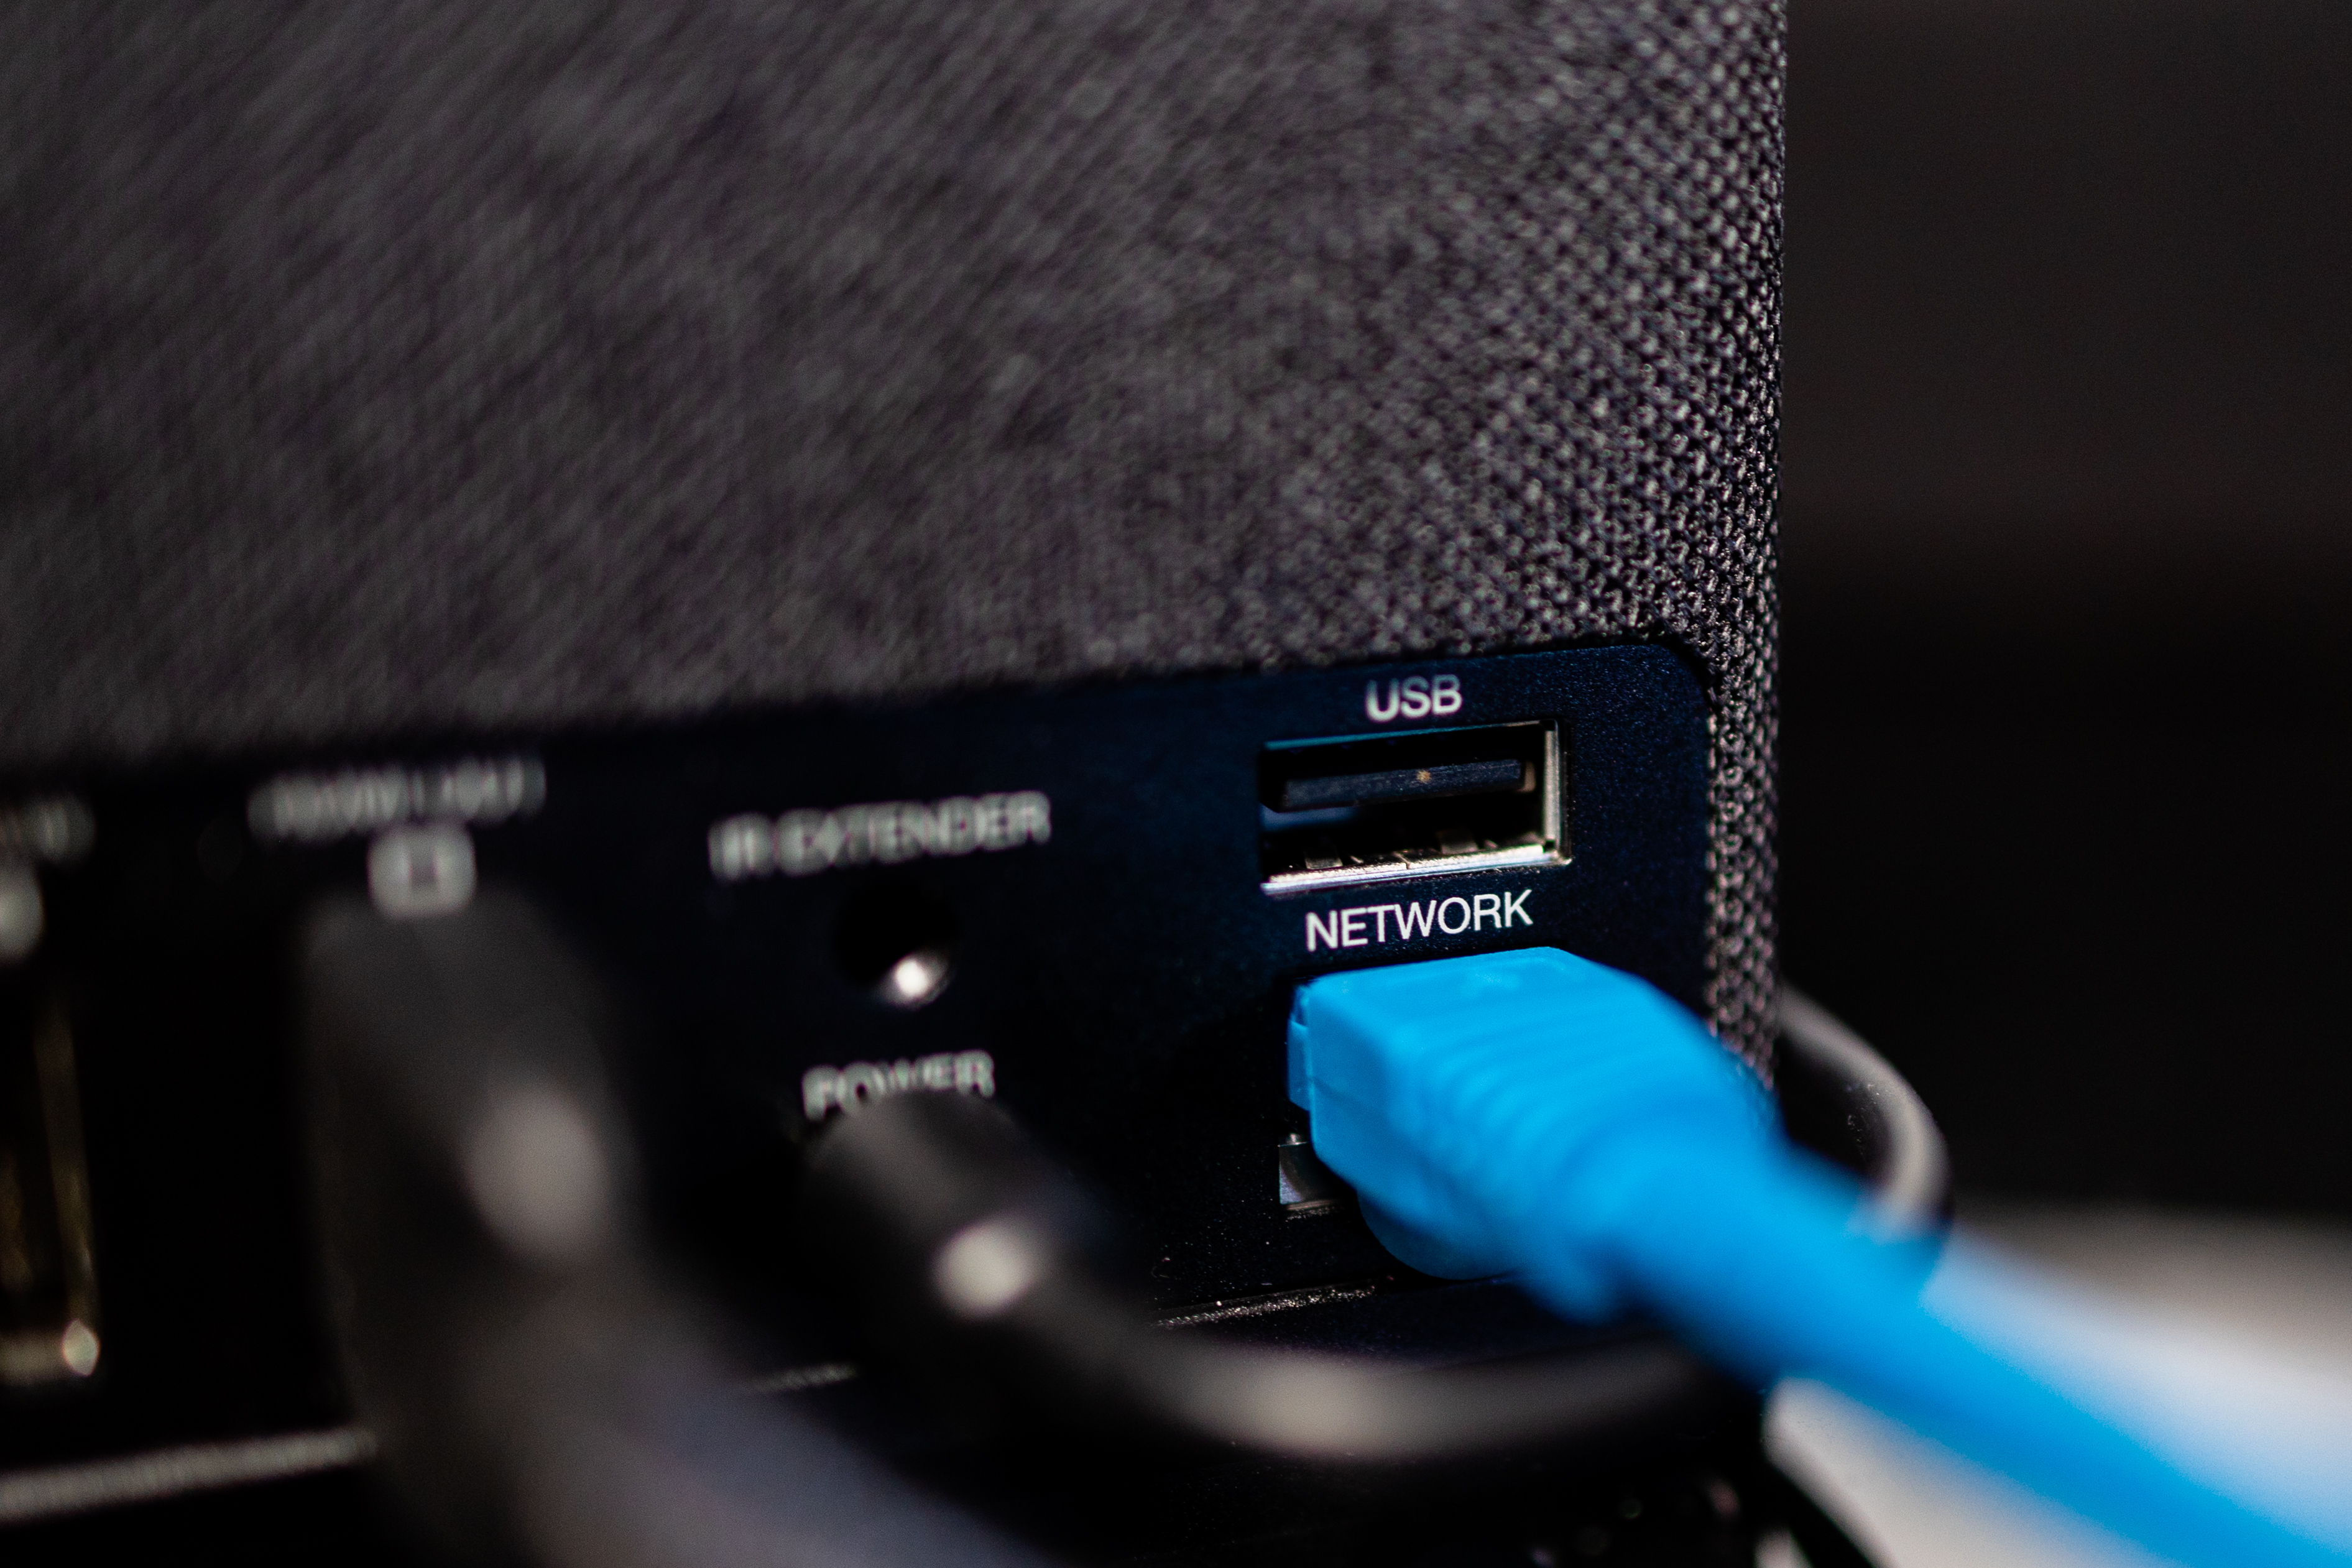 Ethernet Adapters, do they speed up your Firestick? Ask